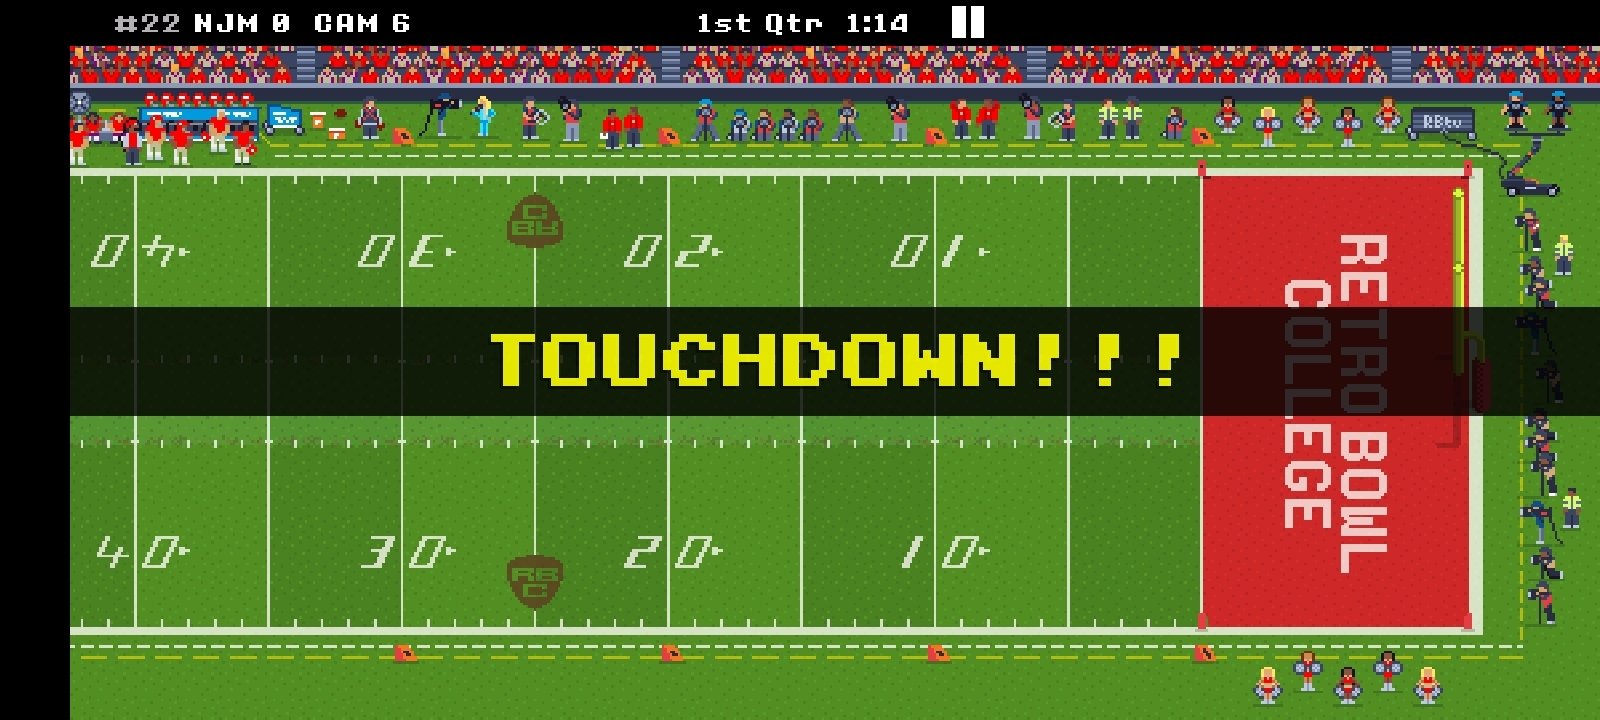 Retro Bowl College android iOS apk download for free-TapTap